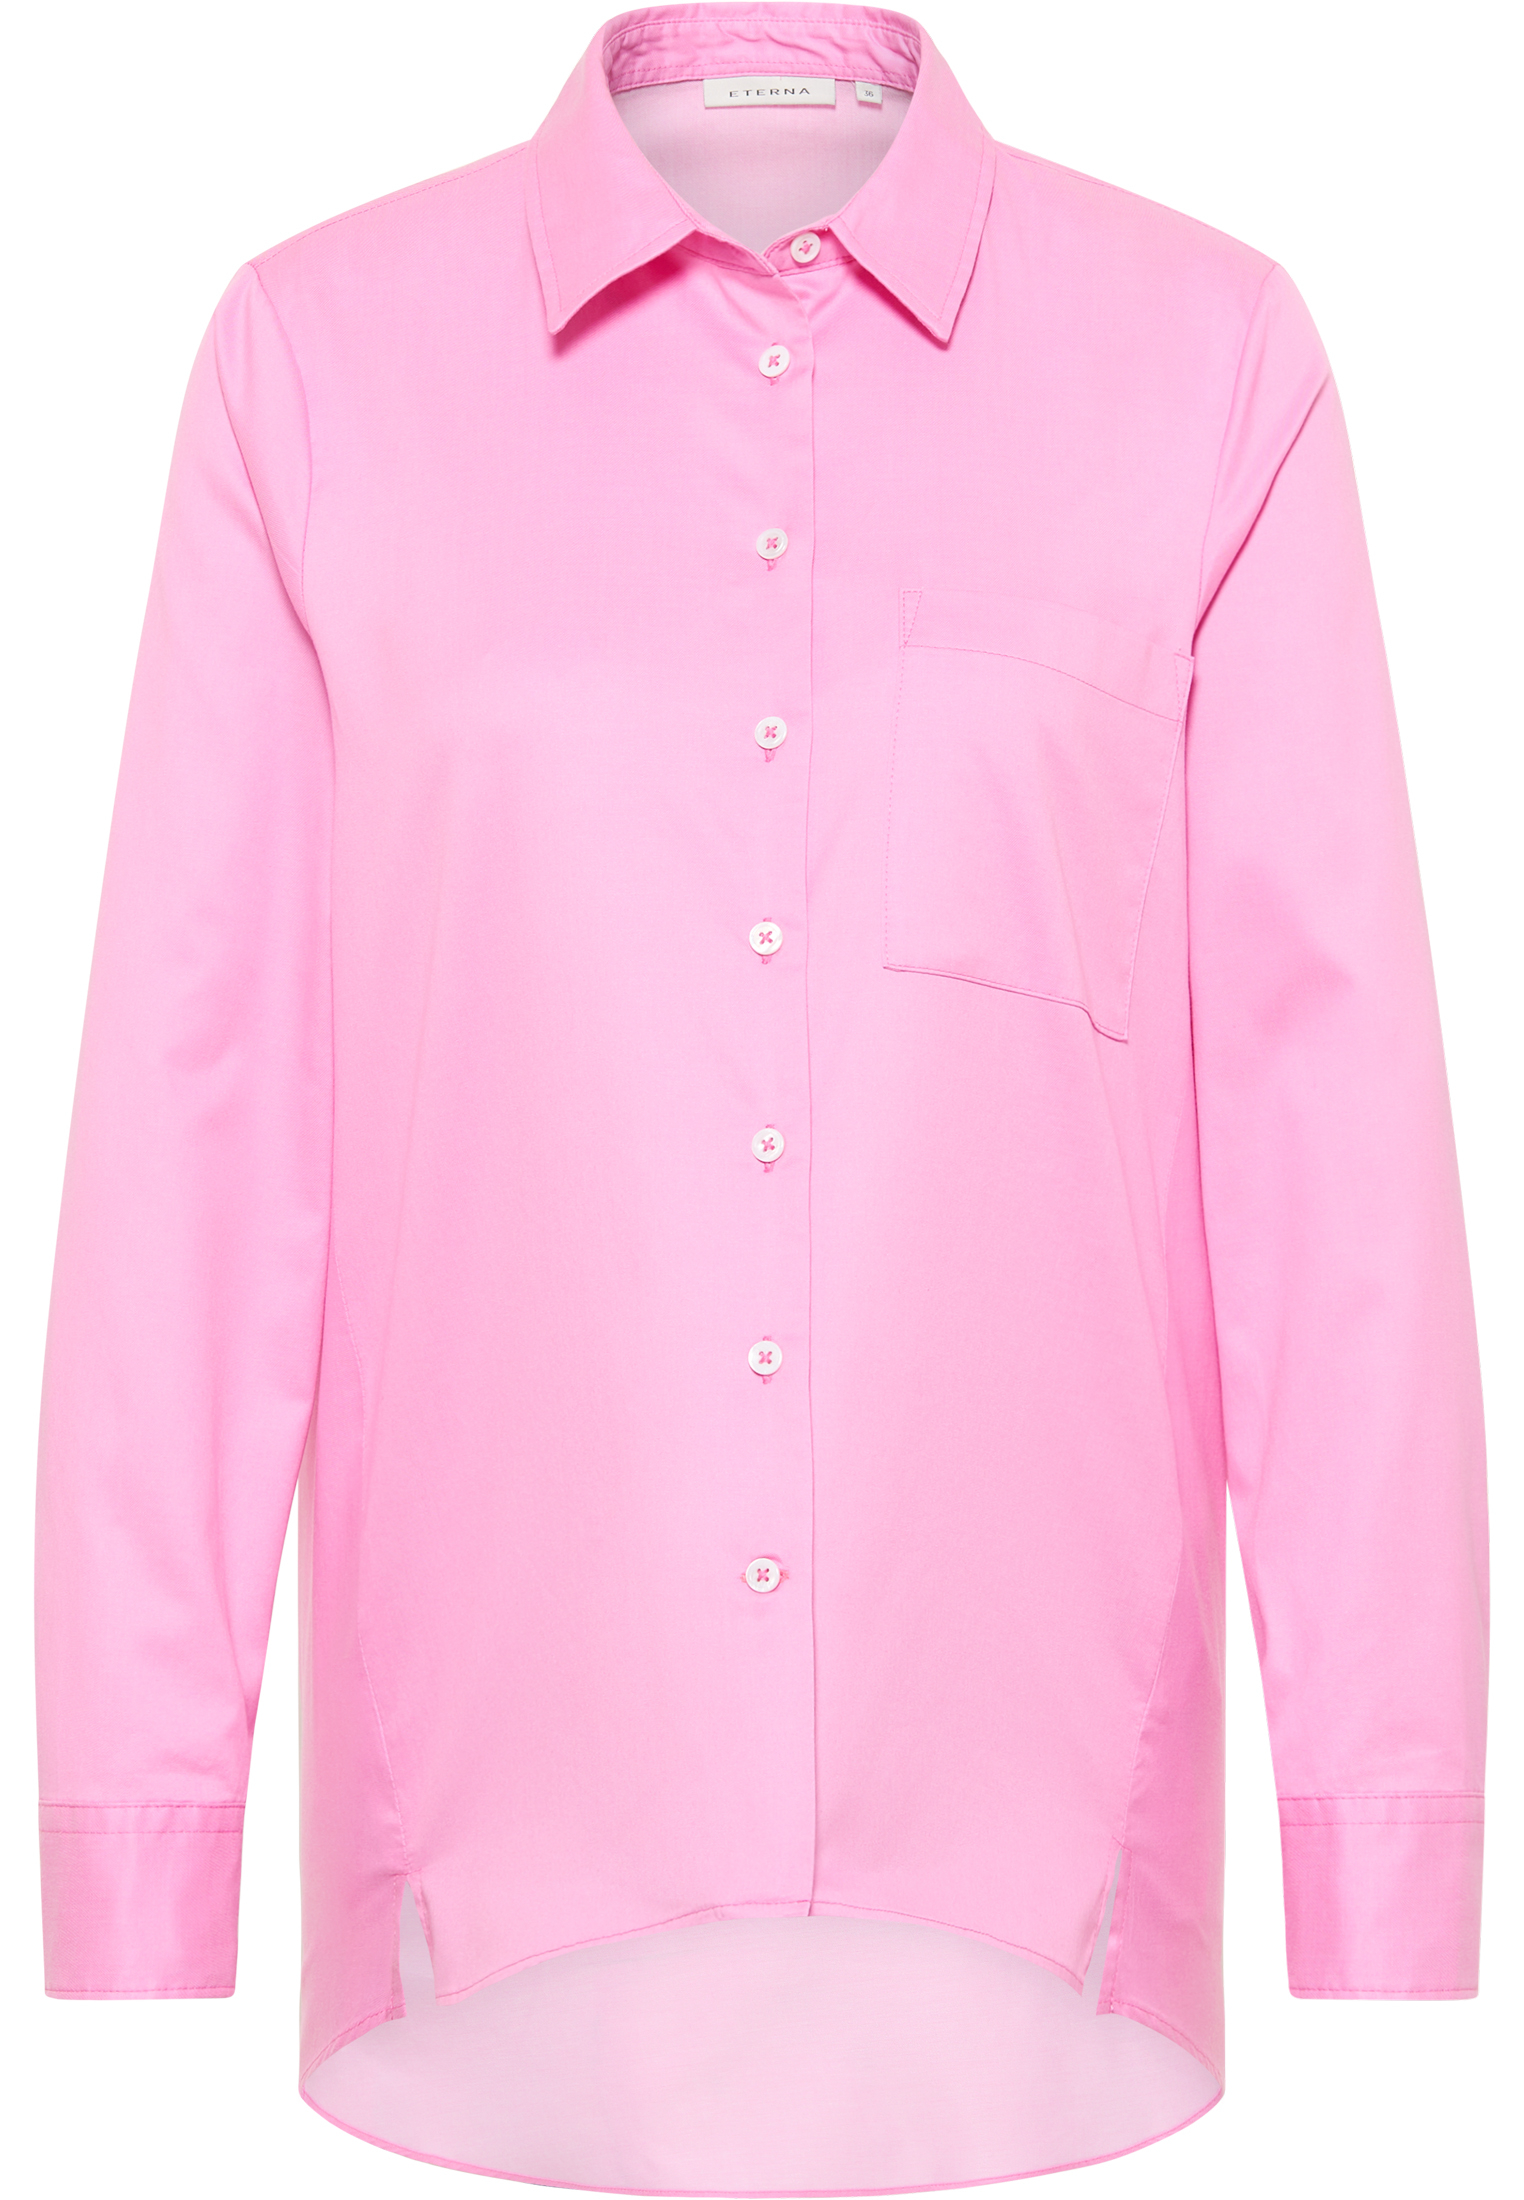 Soft Luxury Shirt Blouse in pink plain | pink | 44 | long sleeve |  2BL03851-15-21-44-1/1